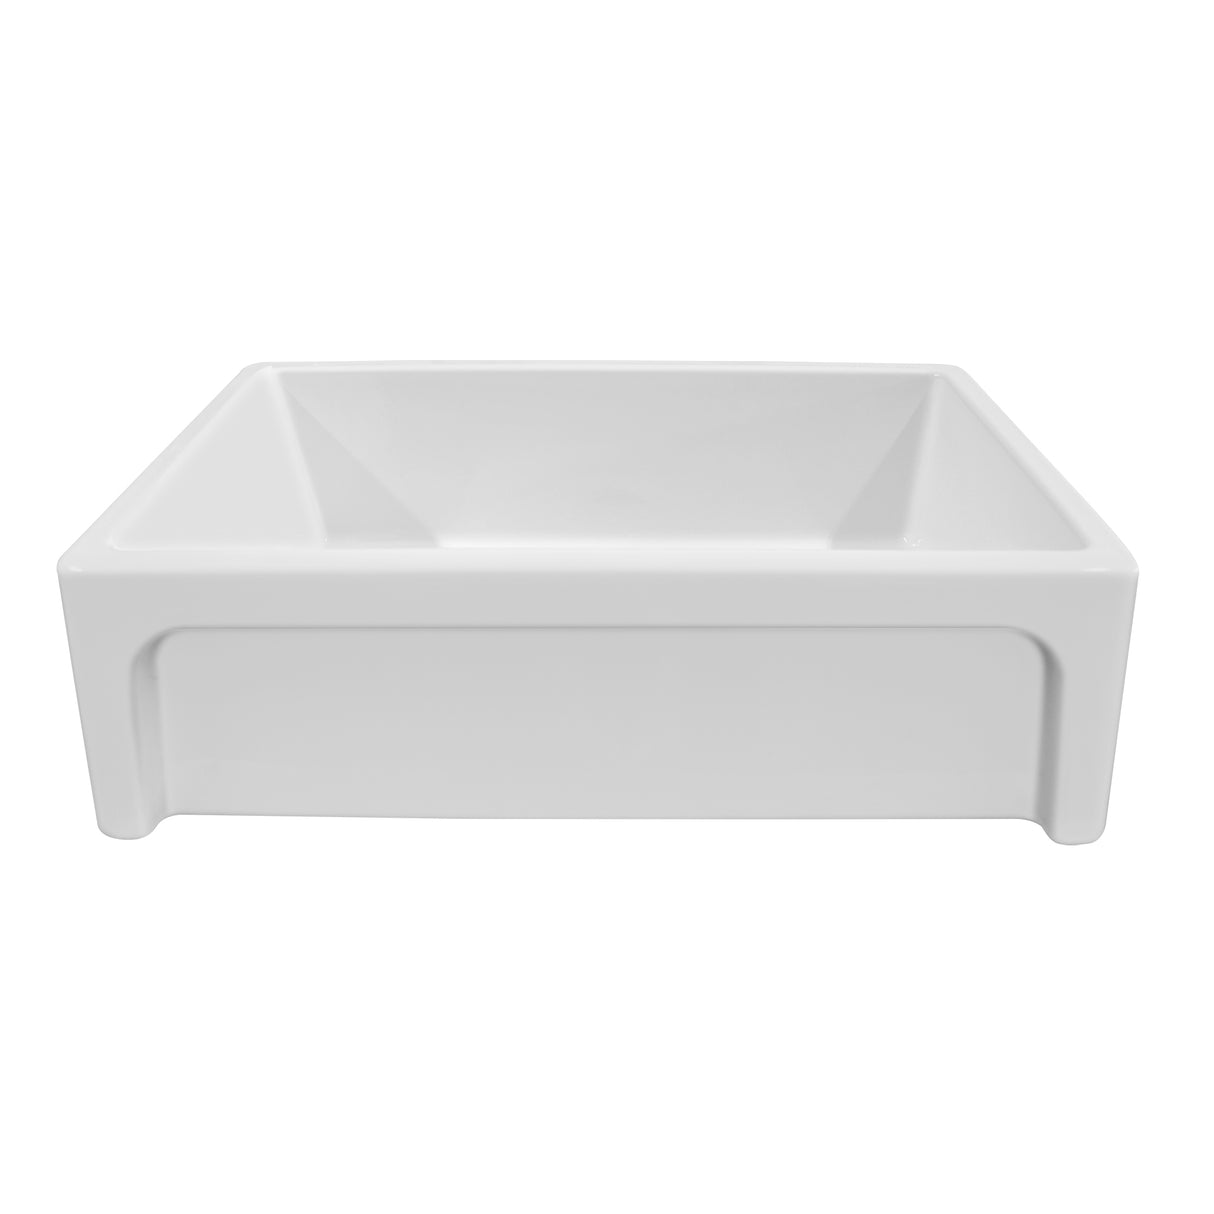 St. Ives Ornamental 33" Reversible Fireclay Kitchen Sink with  Intricate Embossed Vine Design Front Apron on one side and an Elegant Beveled Front Apron on the Opposite Side